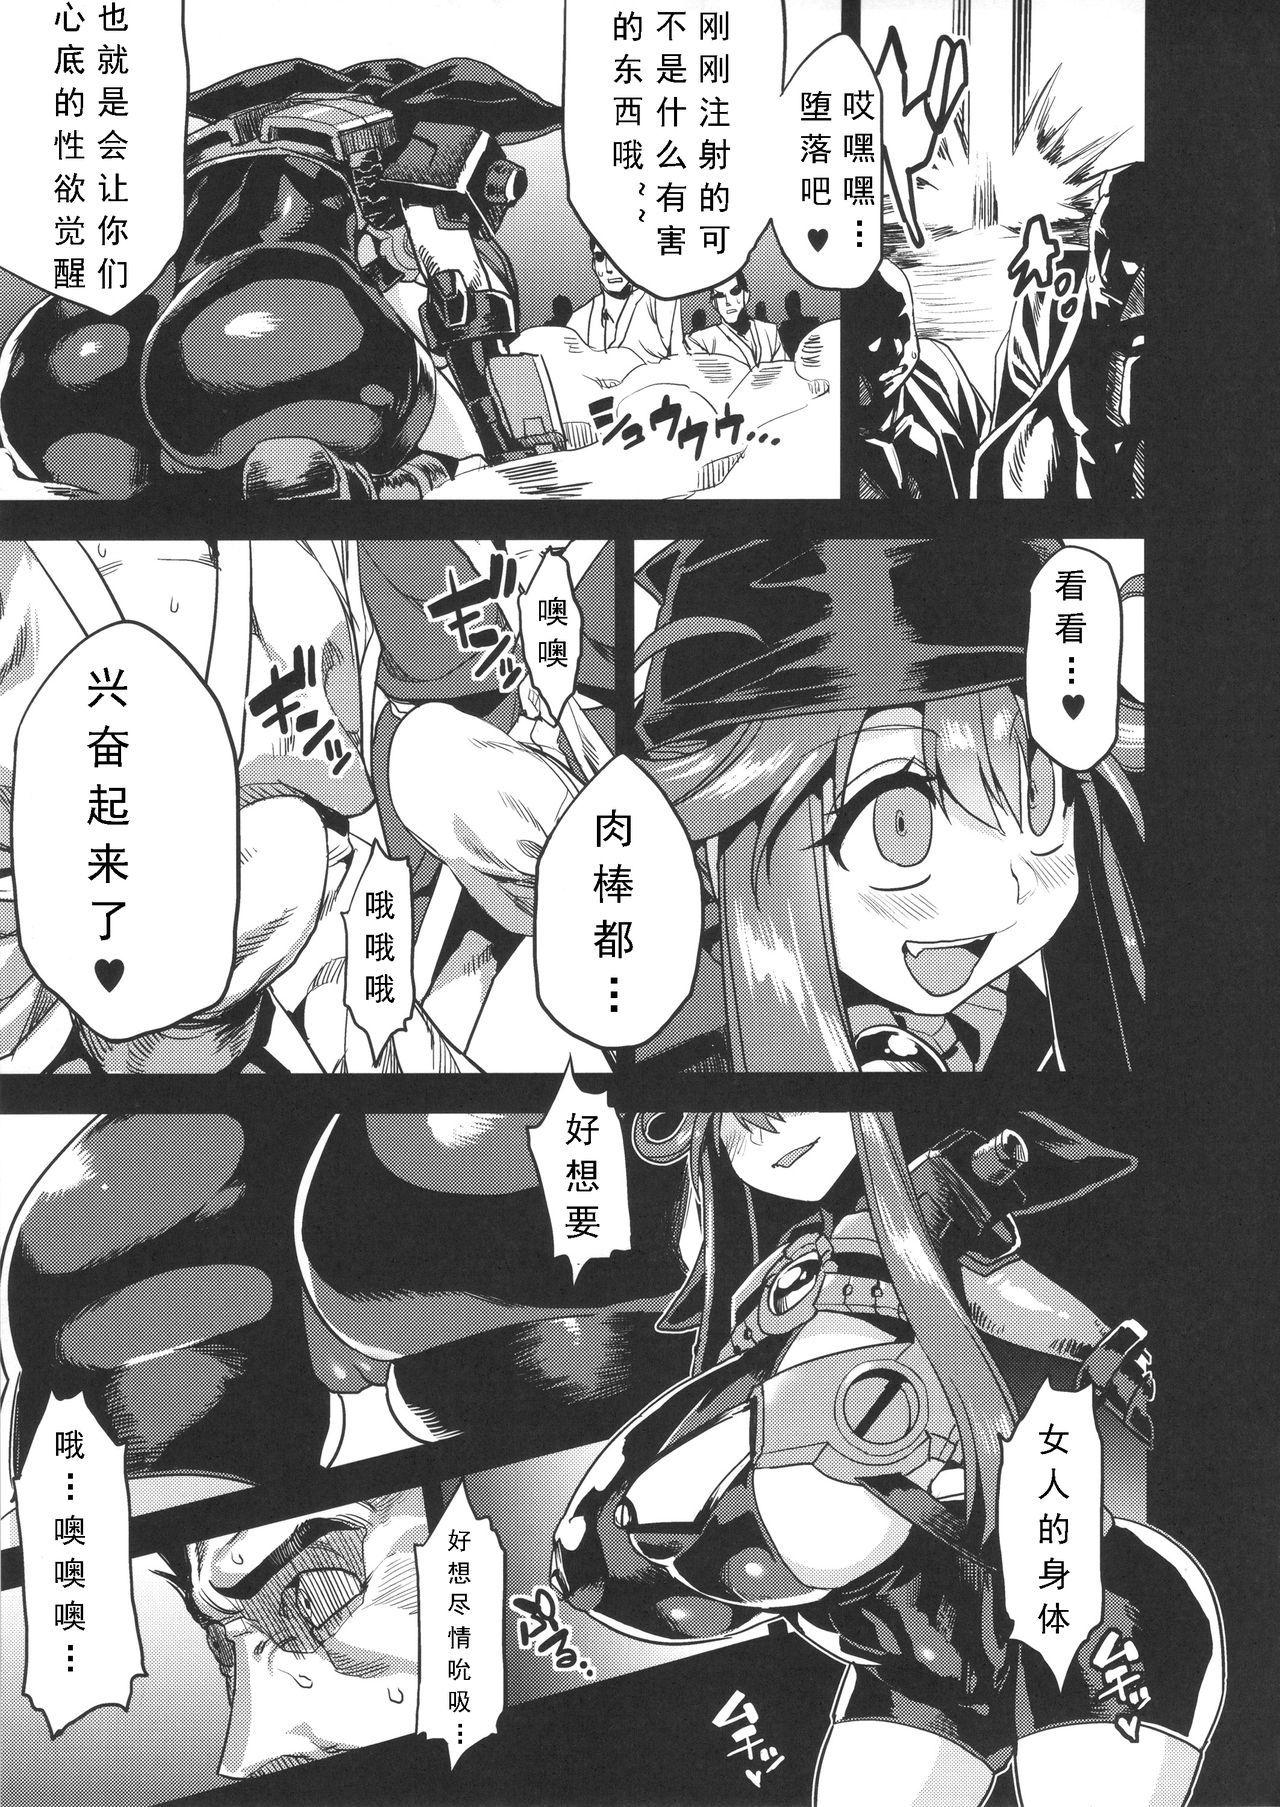 (C89) [OVing (Obui)] Hentai Marionette 4 (Saber Marionette J) [Chinese] [可乐个人汉化] page 5 full